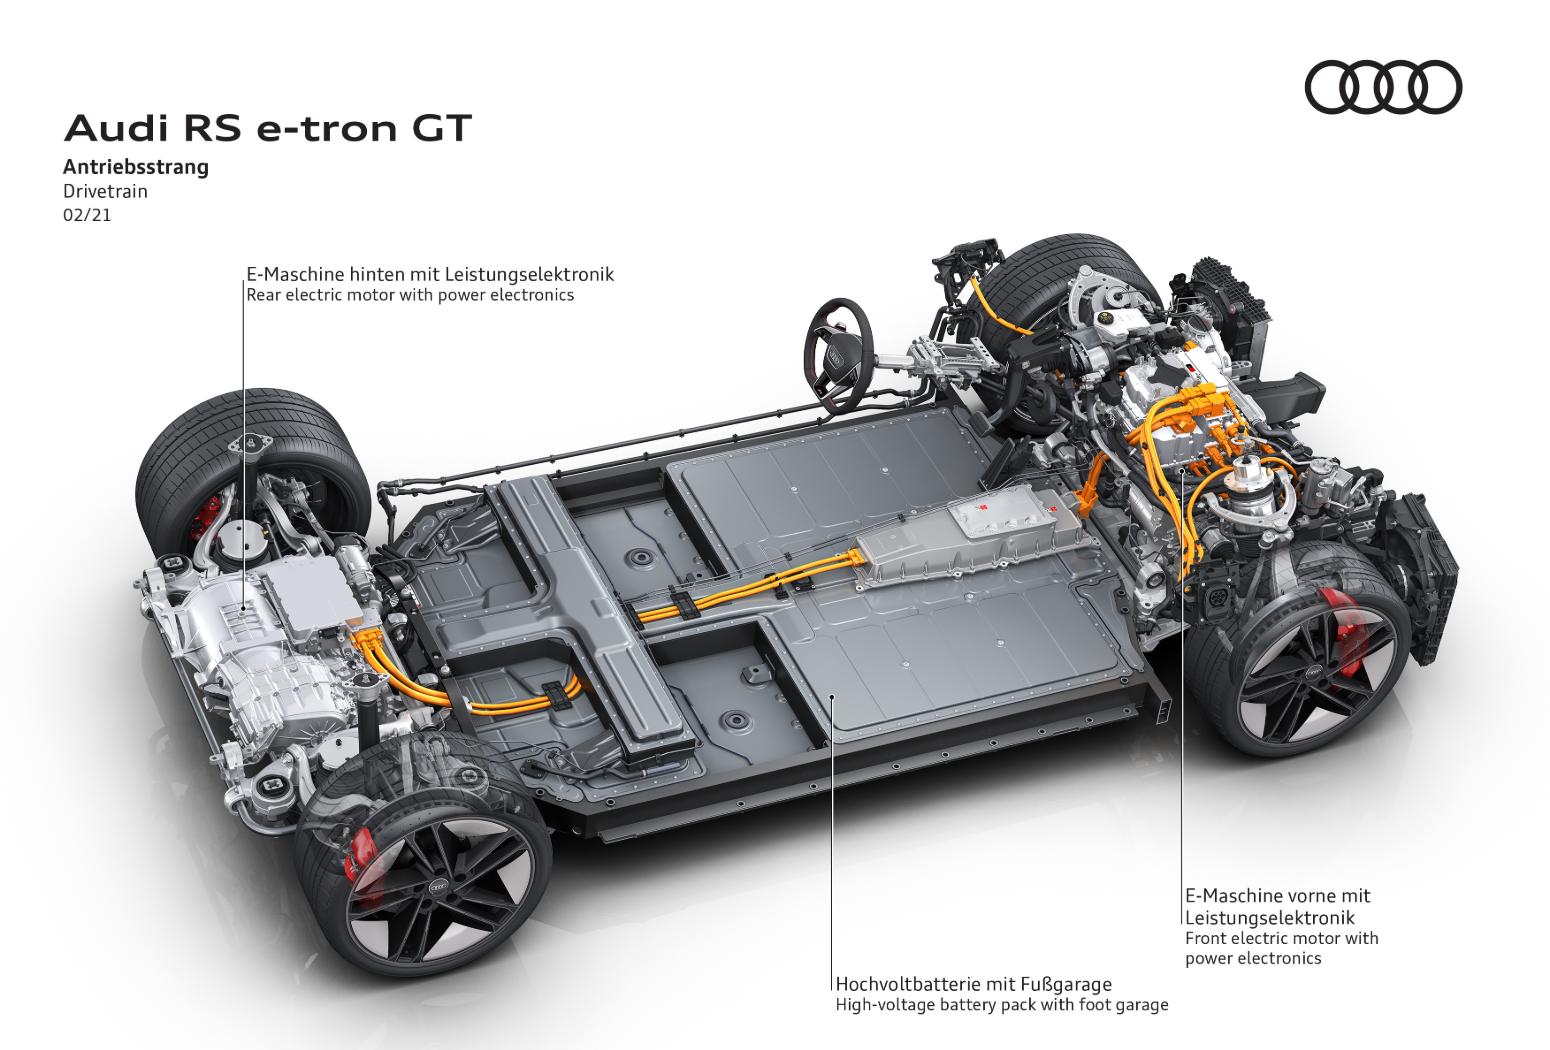 Is Audi's e-tron GT Just a Porsche Taycan With a Different (and Sexier)  Body? - autoevolution